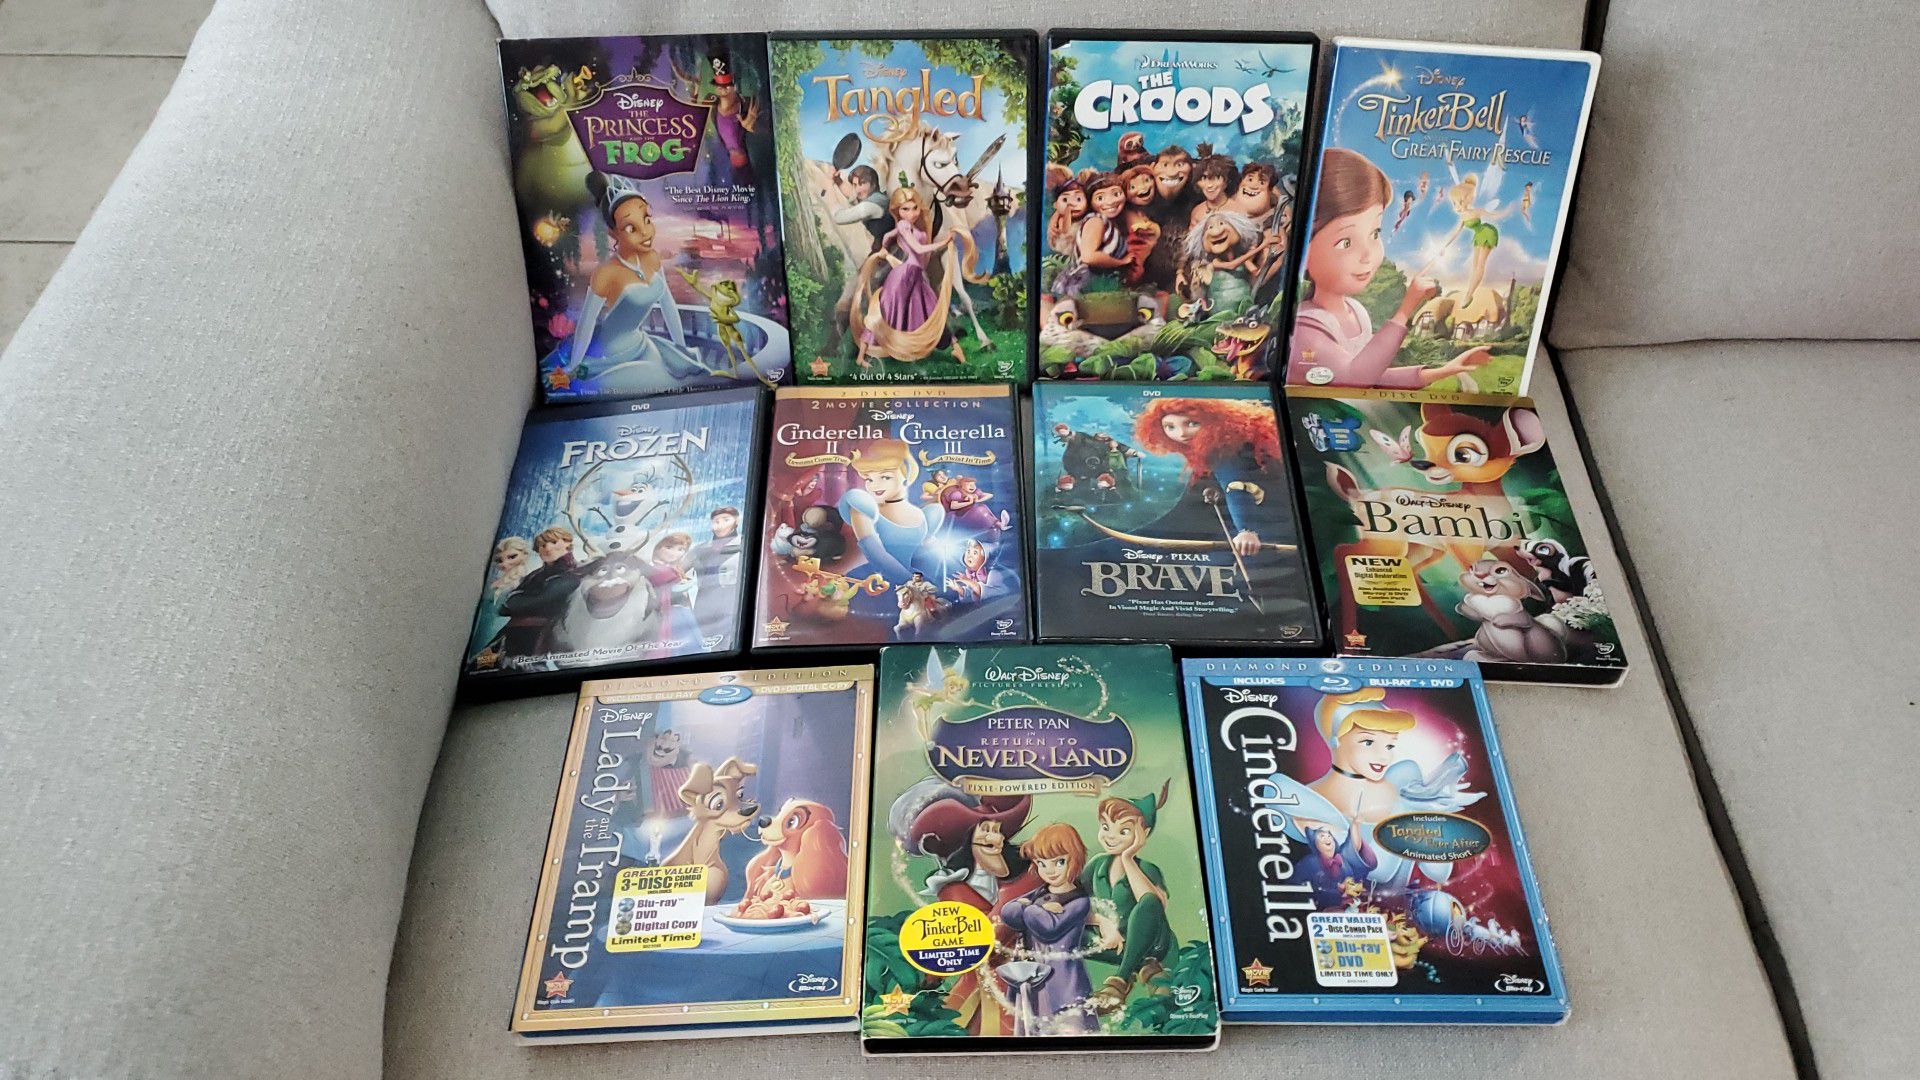 Disney DVD and Blu-ray collection